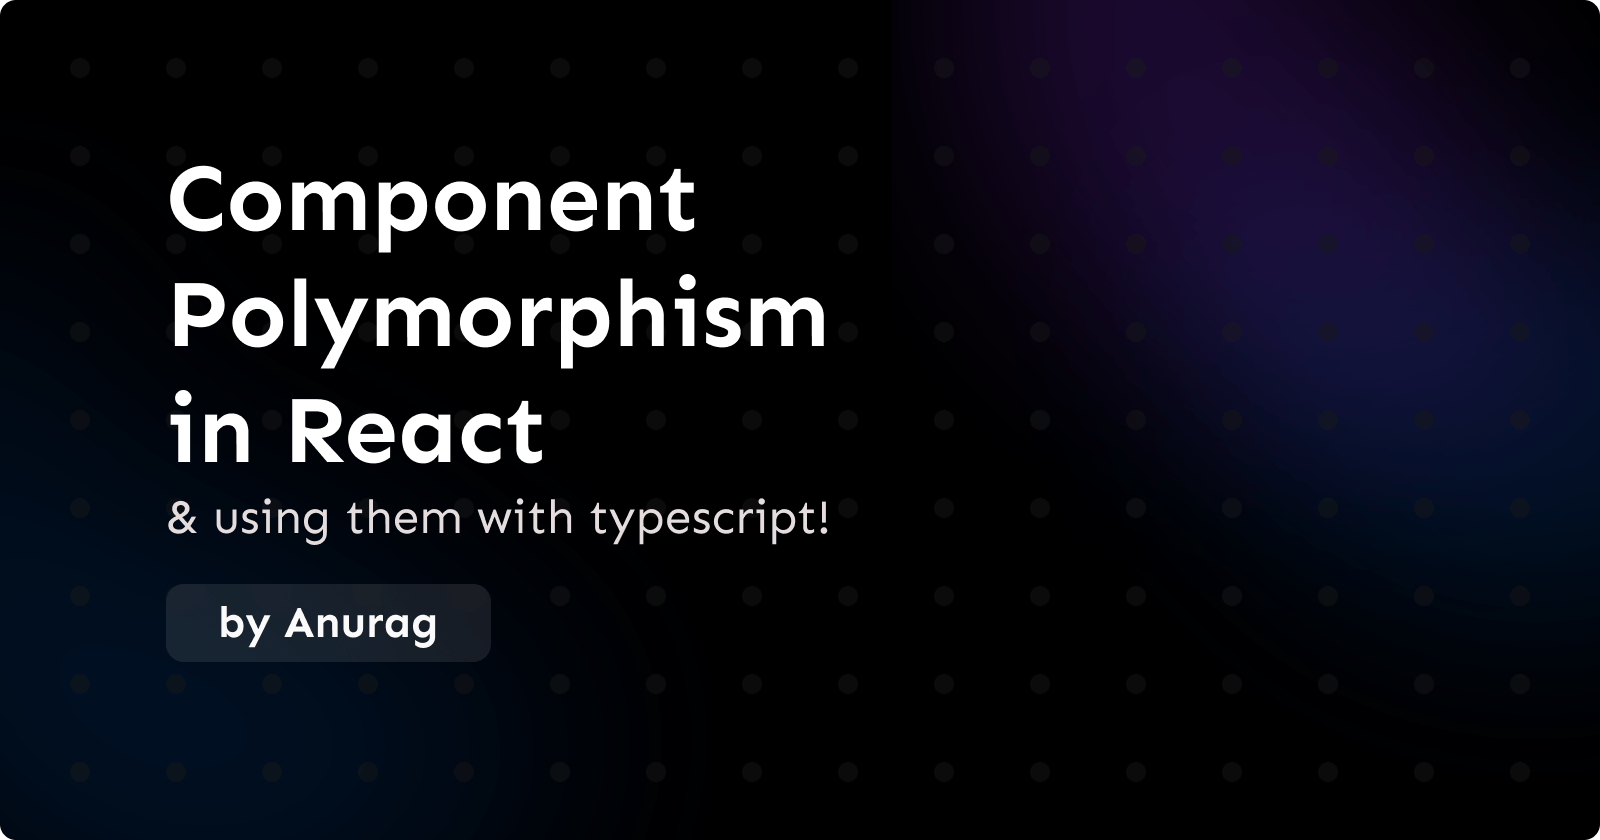 Component Polymorphism in React